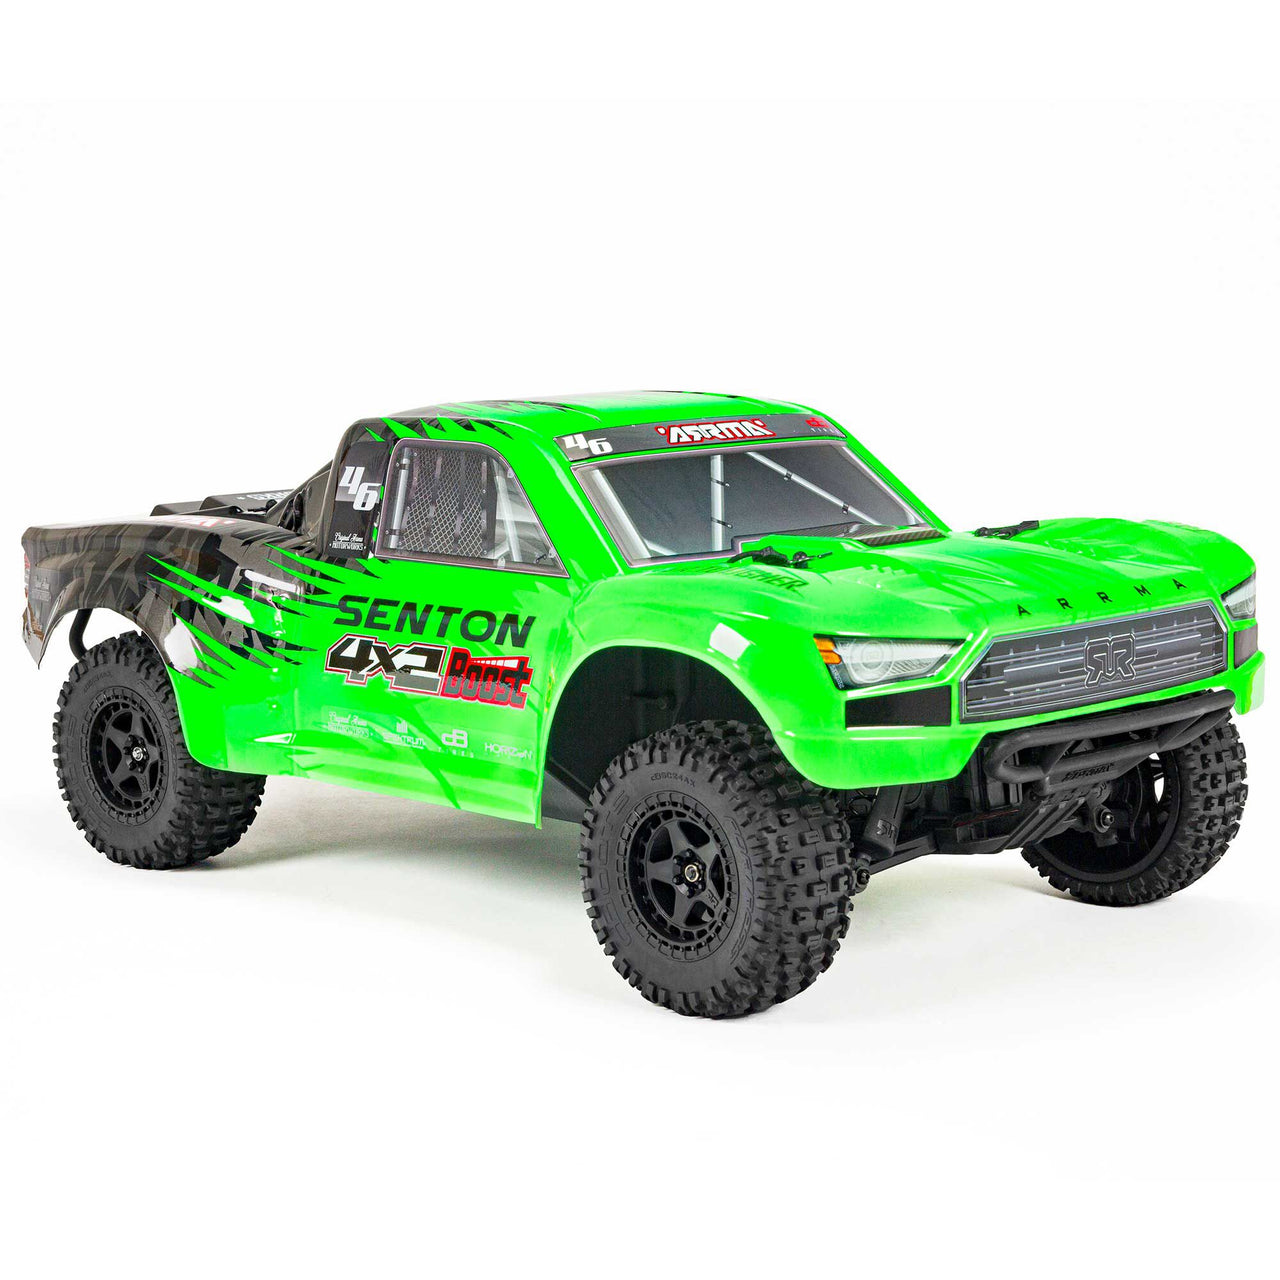 ARA4103SV4T1 1/10 SENTON 4X2 BOOST MEGA 550 Brushed Short Course Truck RTR with Battery & Charger, Green